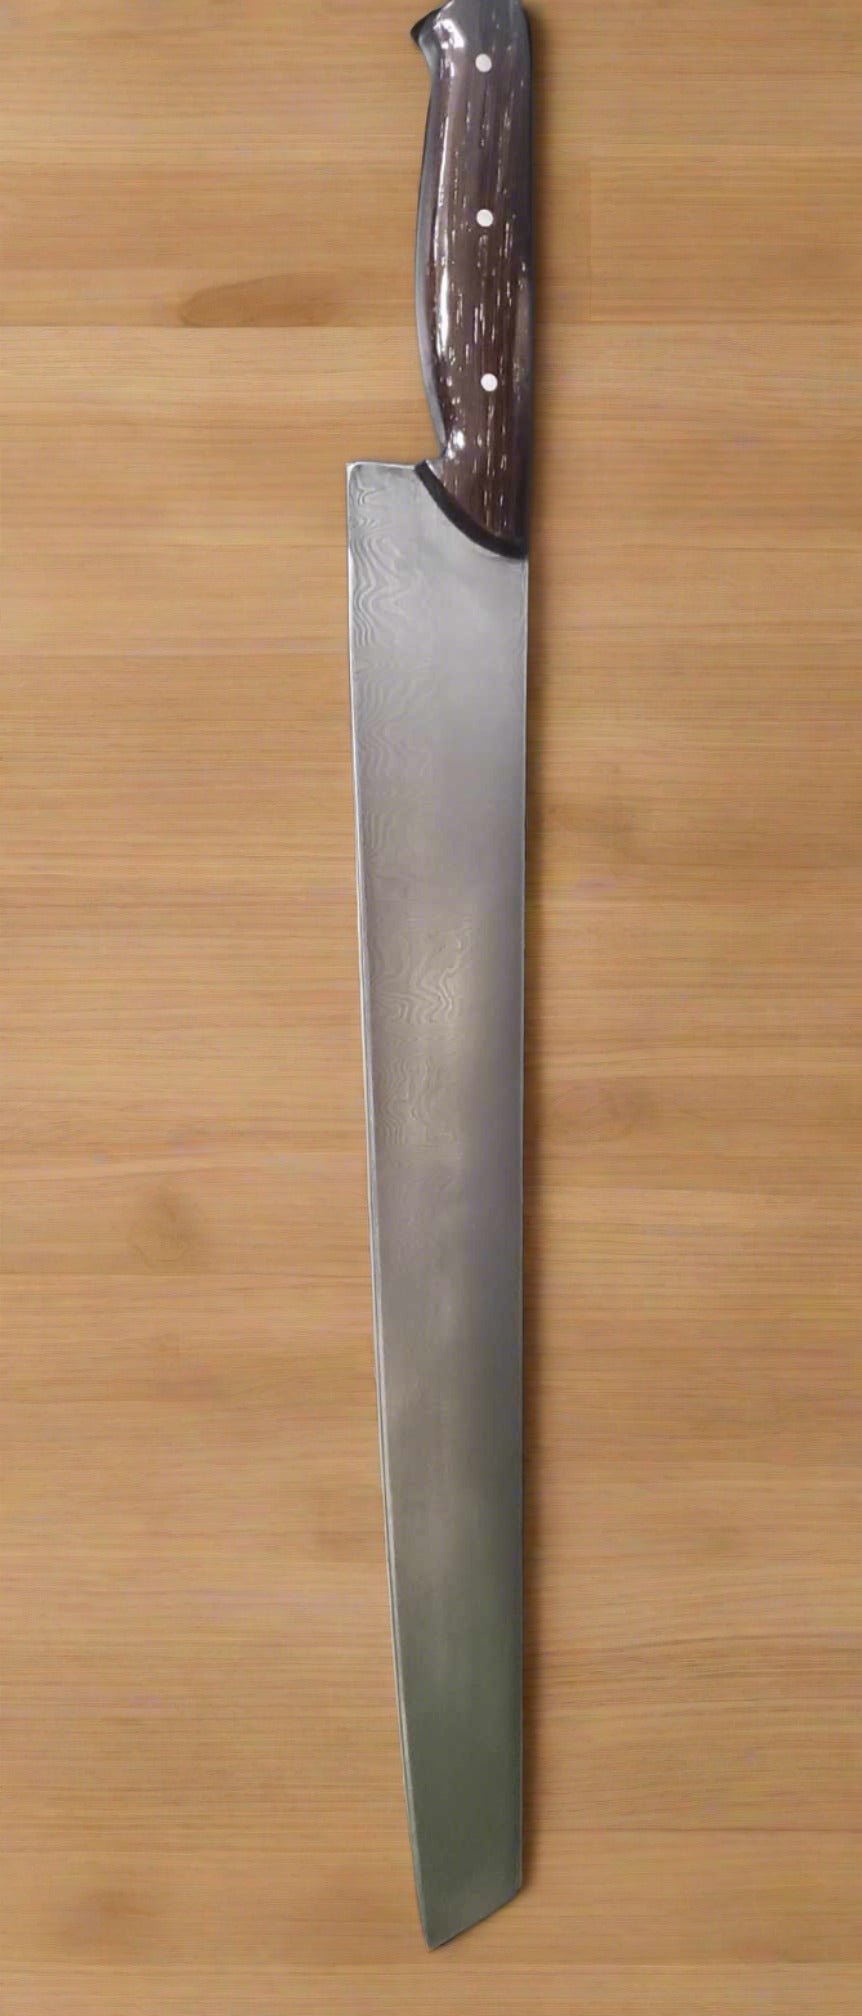 Locally Made Butcher Knife